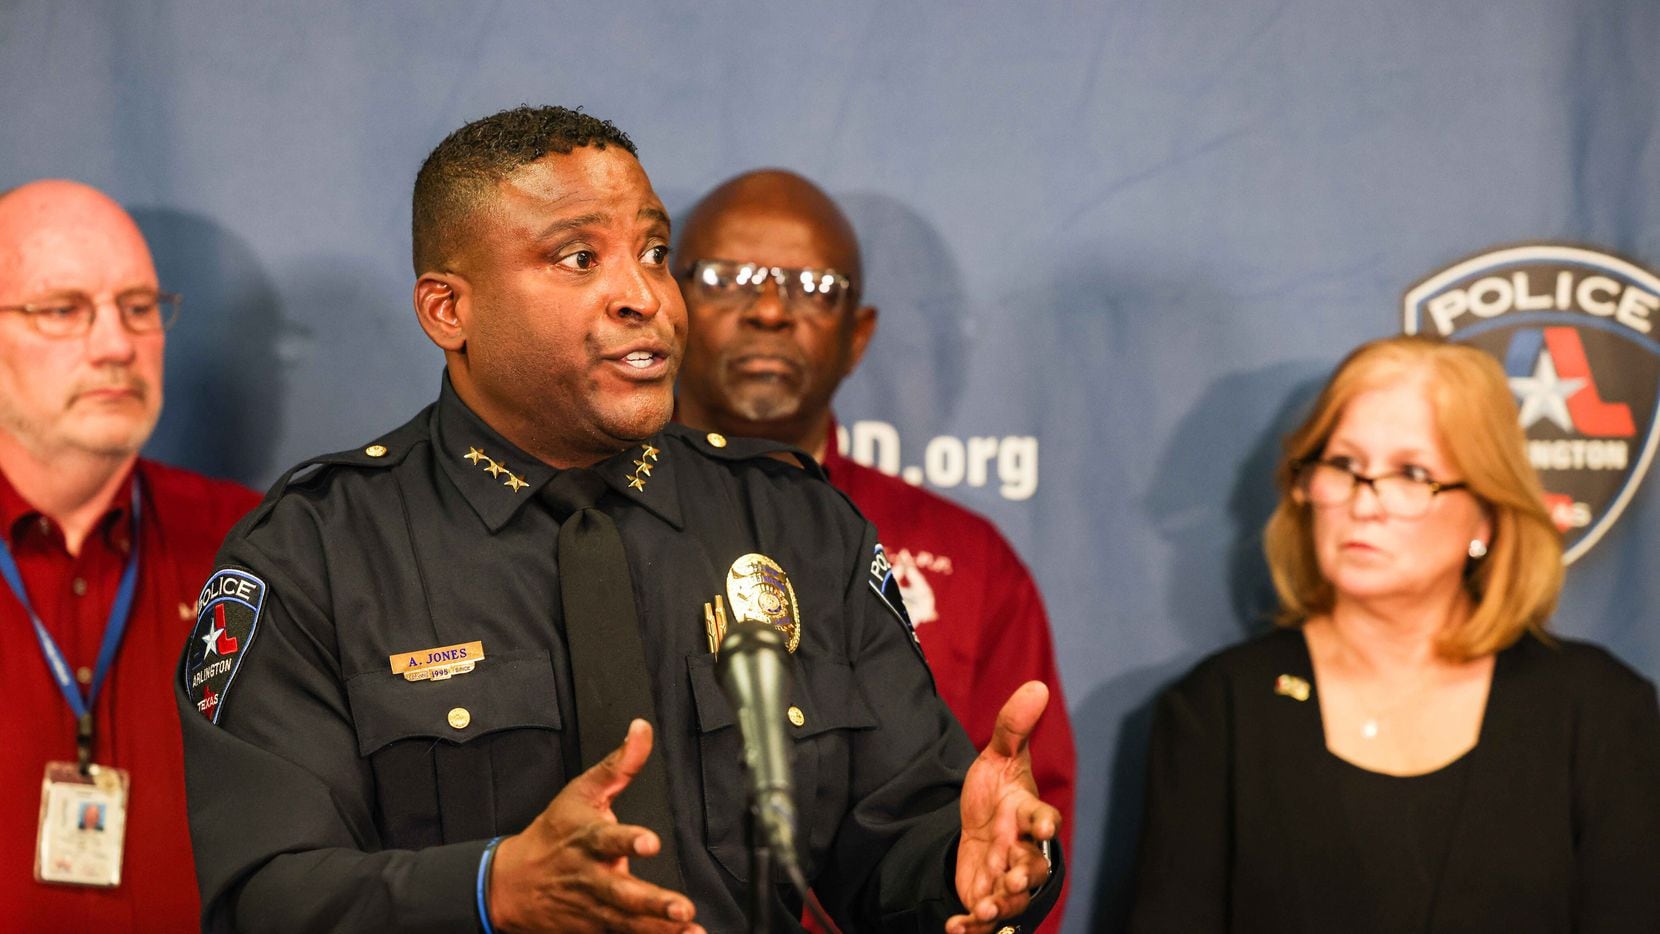 Arlington Chief of Police Al Jones during a press conference on Oct. 22, 2021.